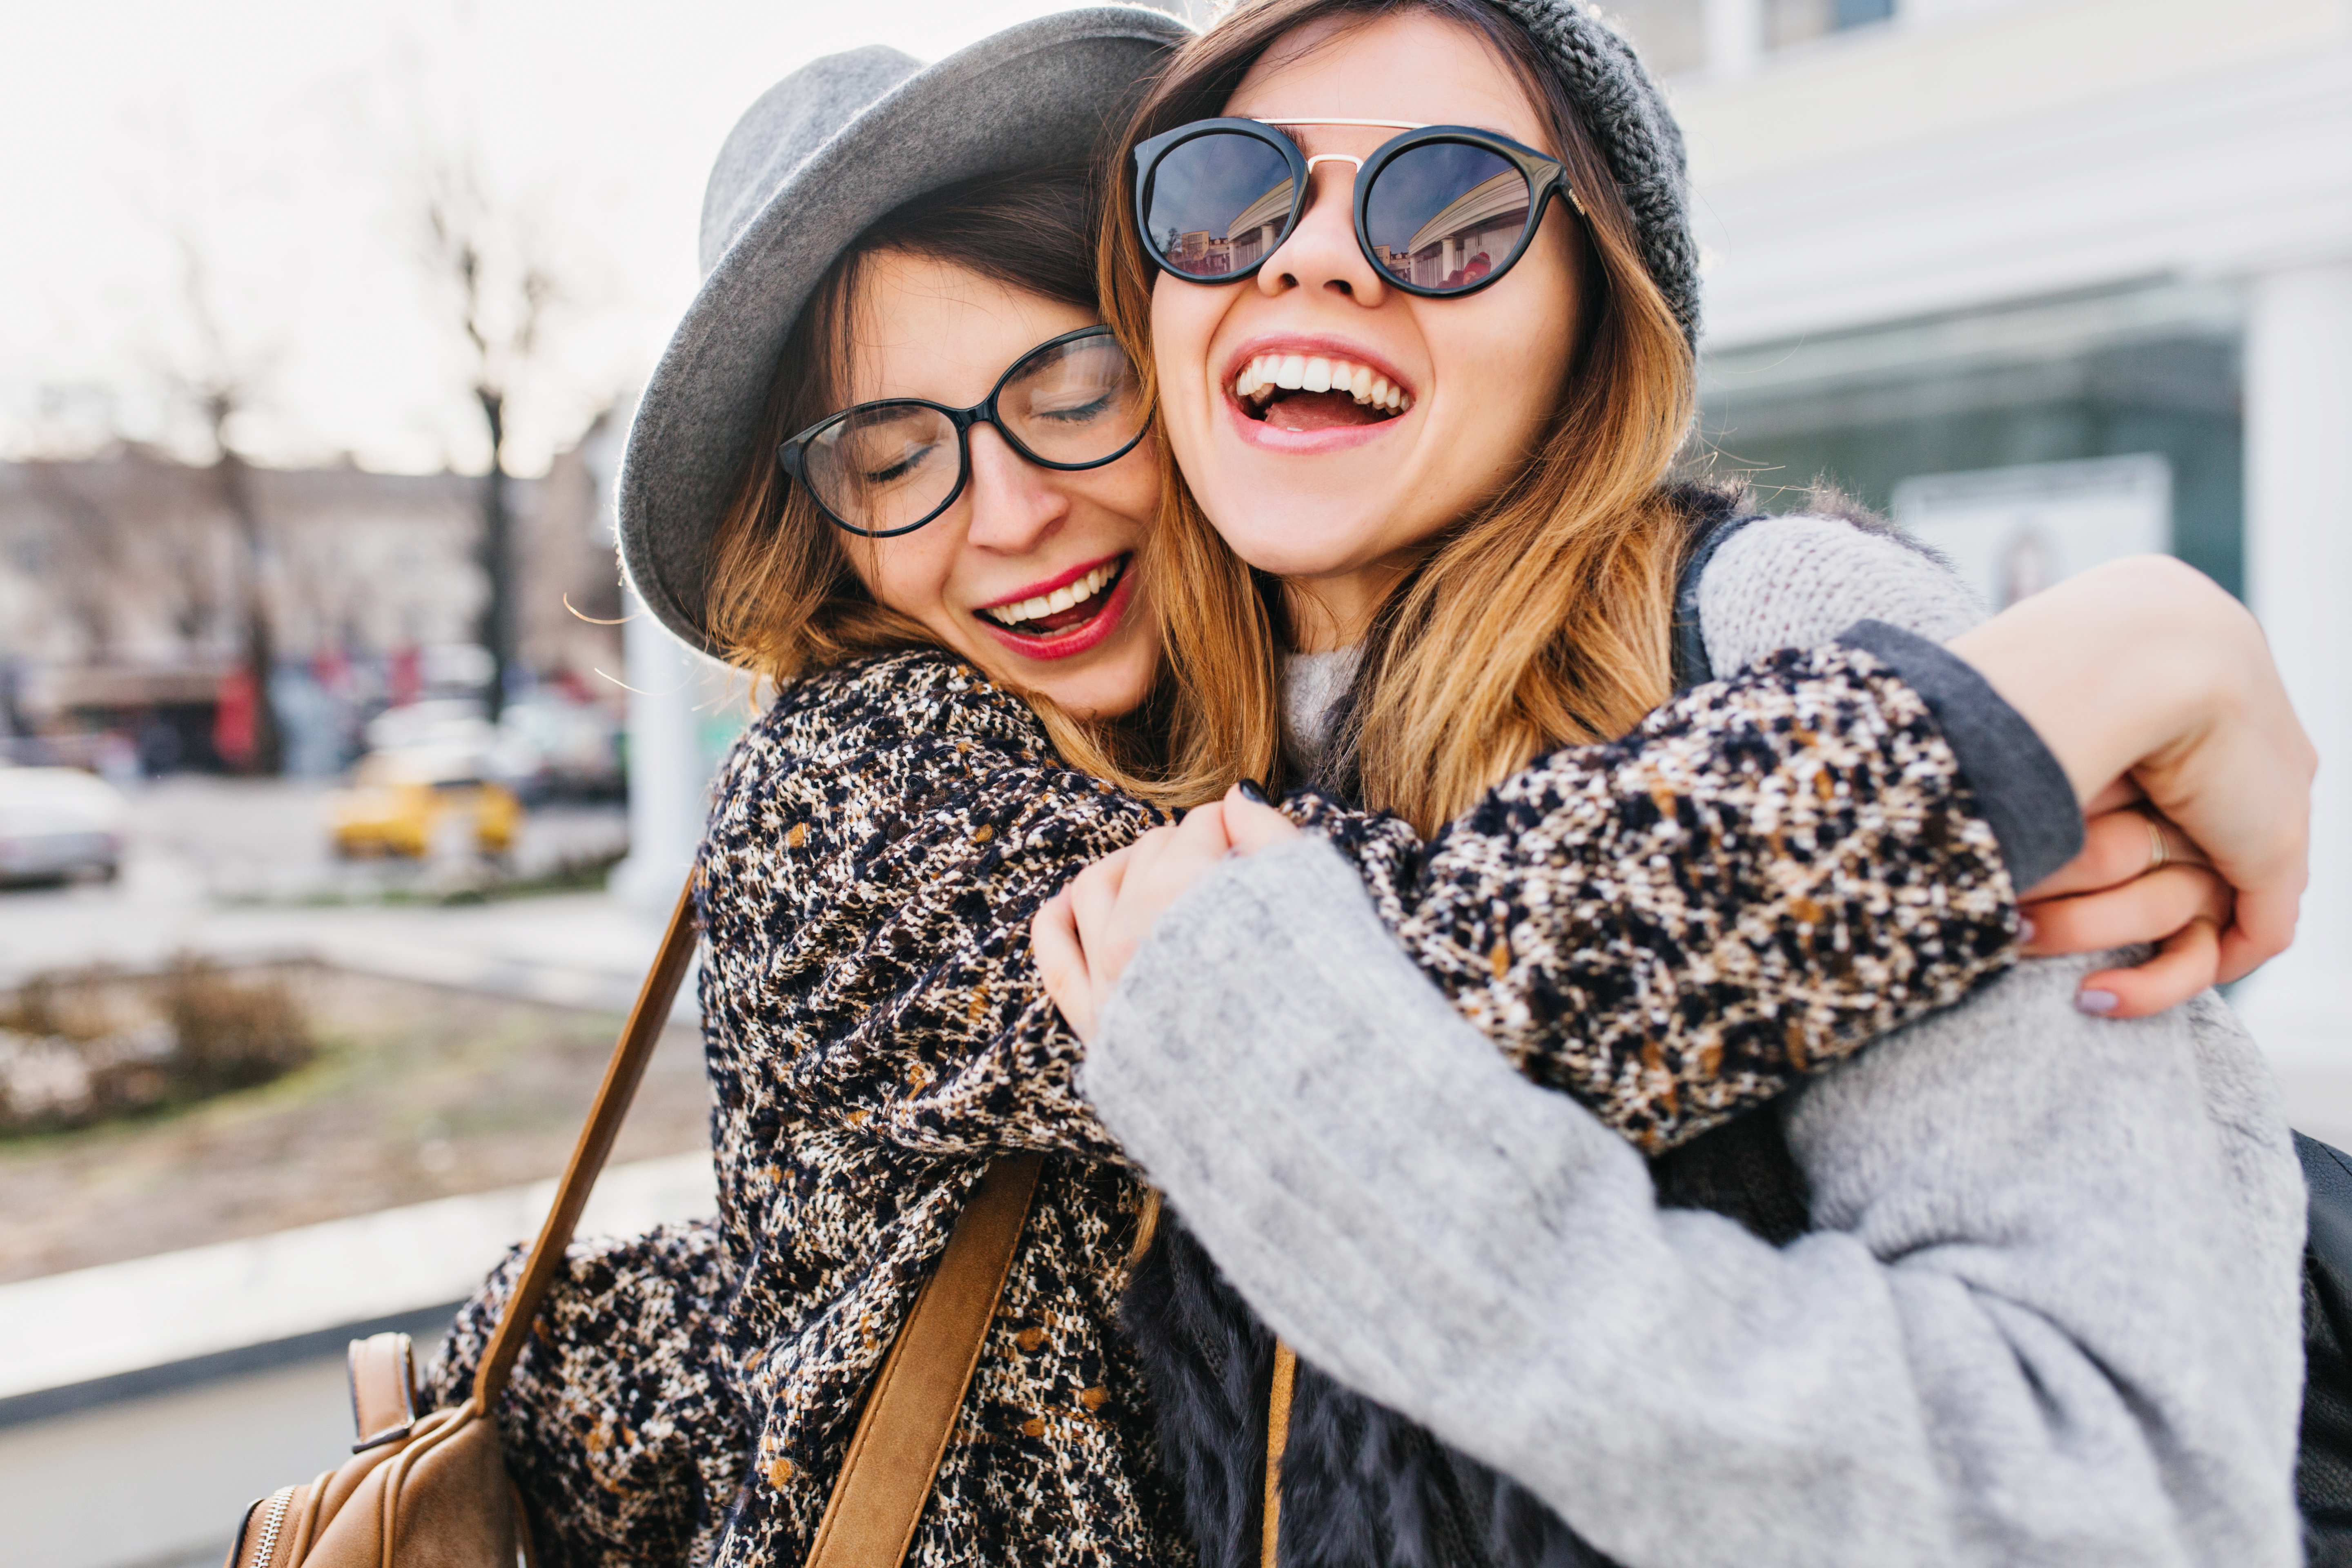 Two young woman laughing and hugging | Source: Shutterstock